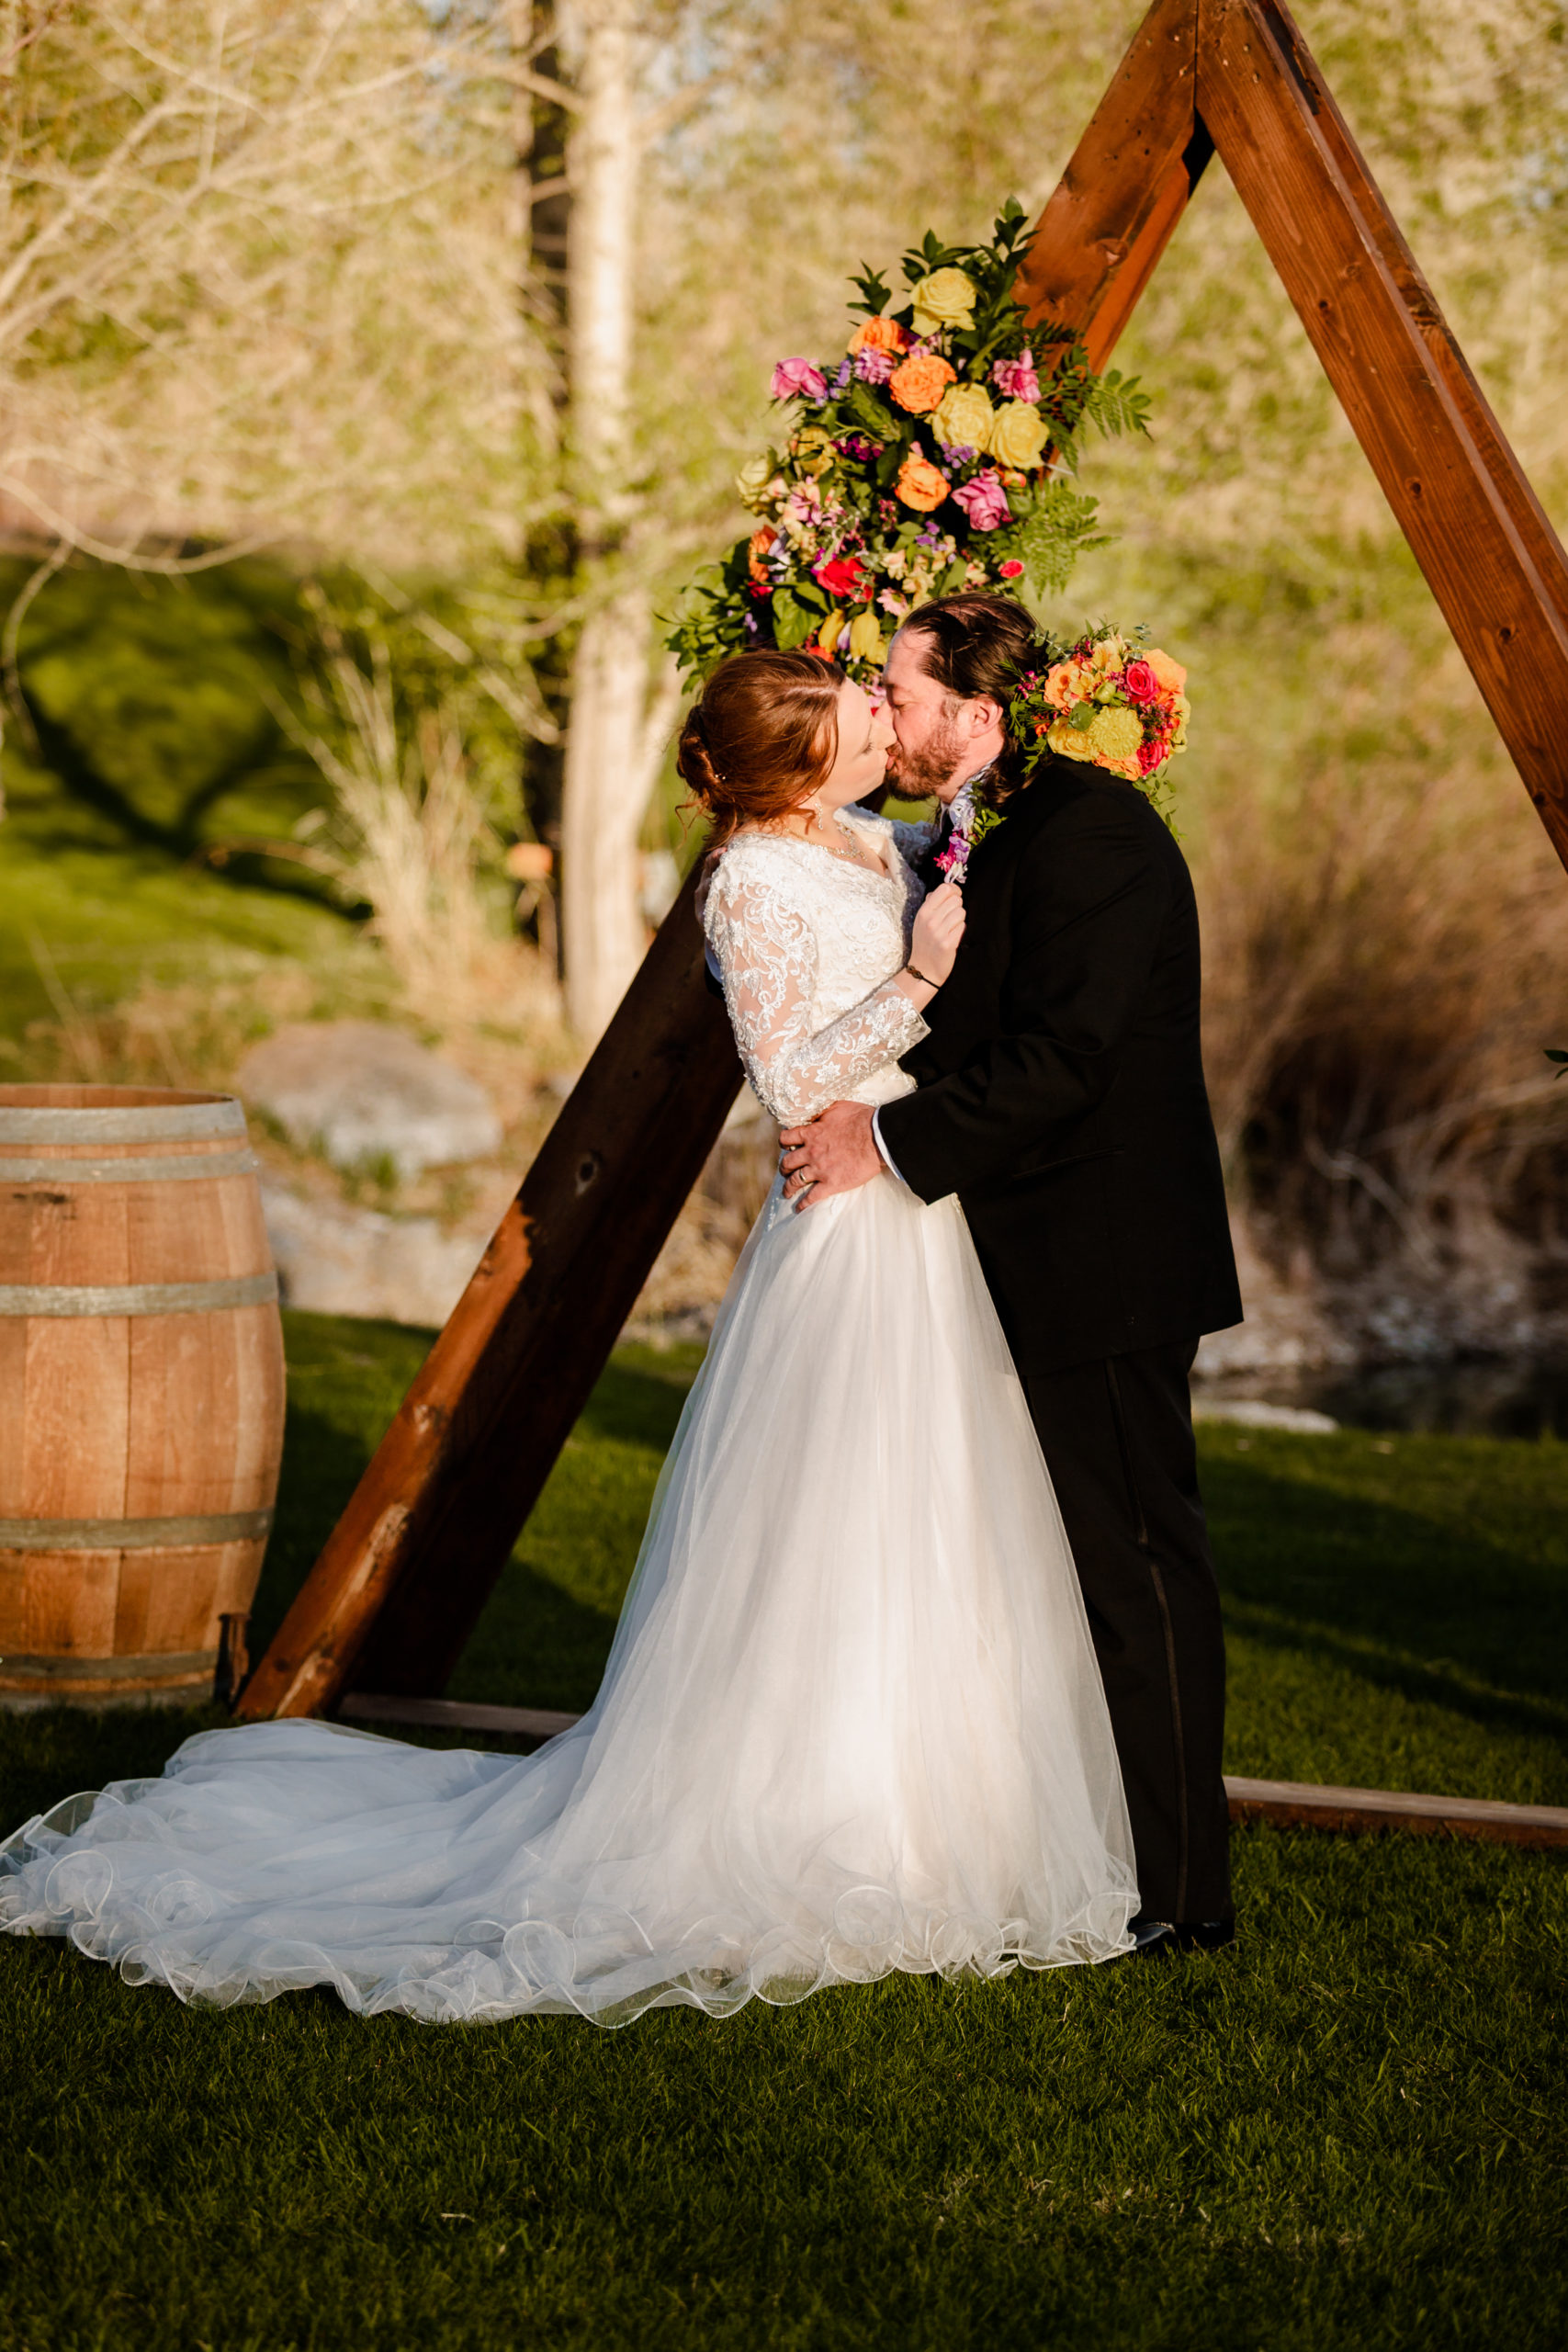 outdoor wedding ceremony at LaBelle Lake wedding venue with bride and groom sharing a kiss under their triangle wedding arch decorated in orange florals